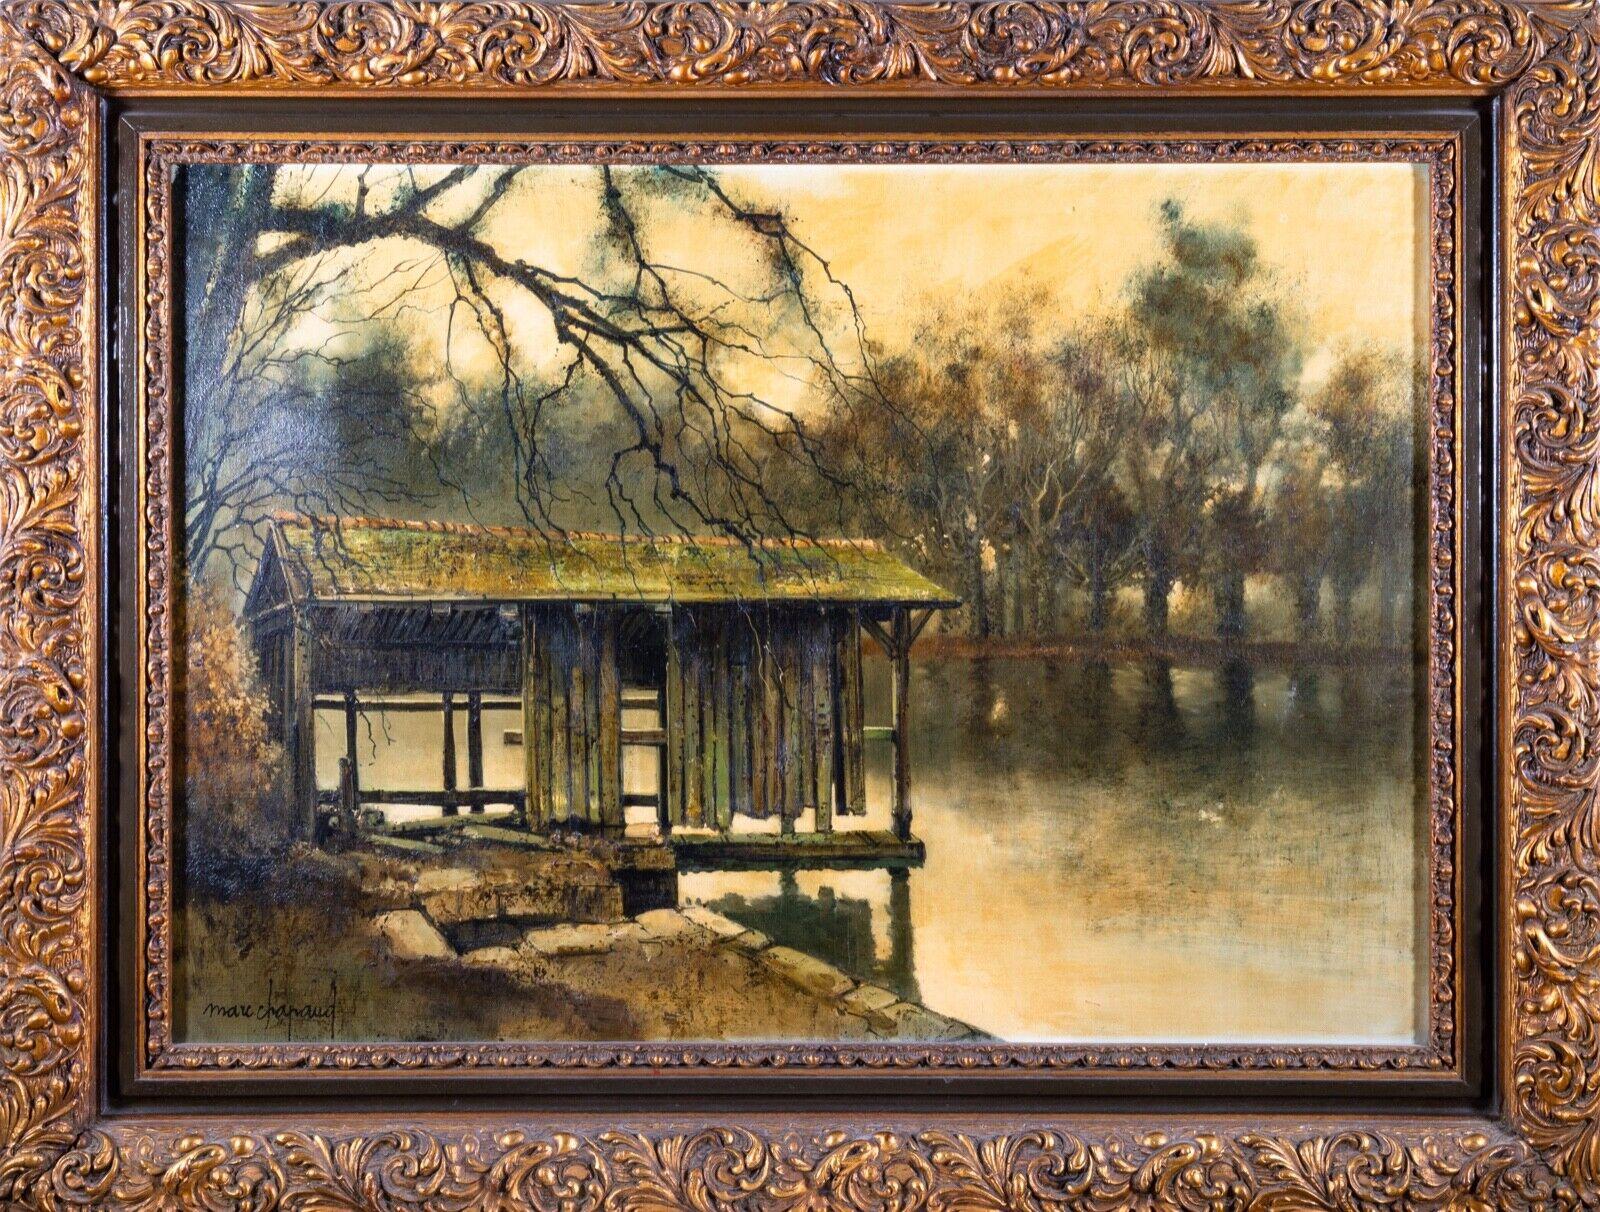 A serene and calming French landscape oil painting on canvas titled “Etang (Pond) at Sologne” by Marc Chapaud. Hand signed bottom left. Verso signed, dated 1975, and titled. Original gallery tag from W. T. Burger Co. Inc. on verso. Marc Chapaud was